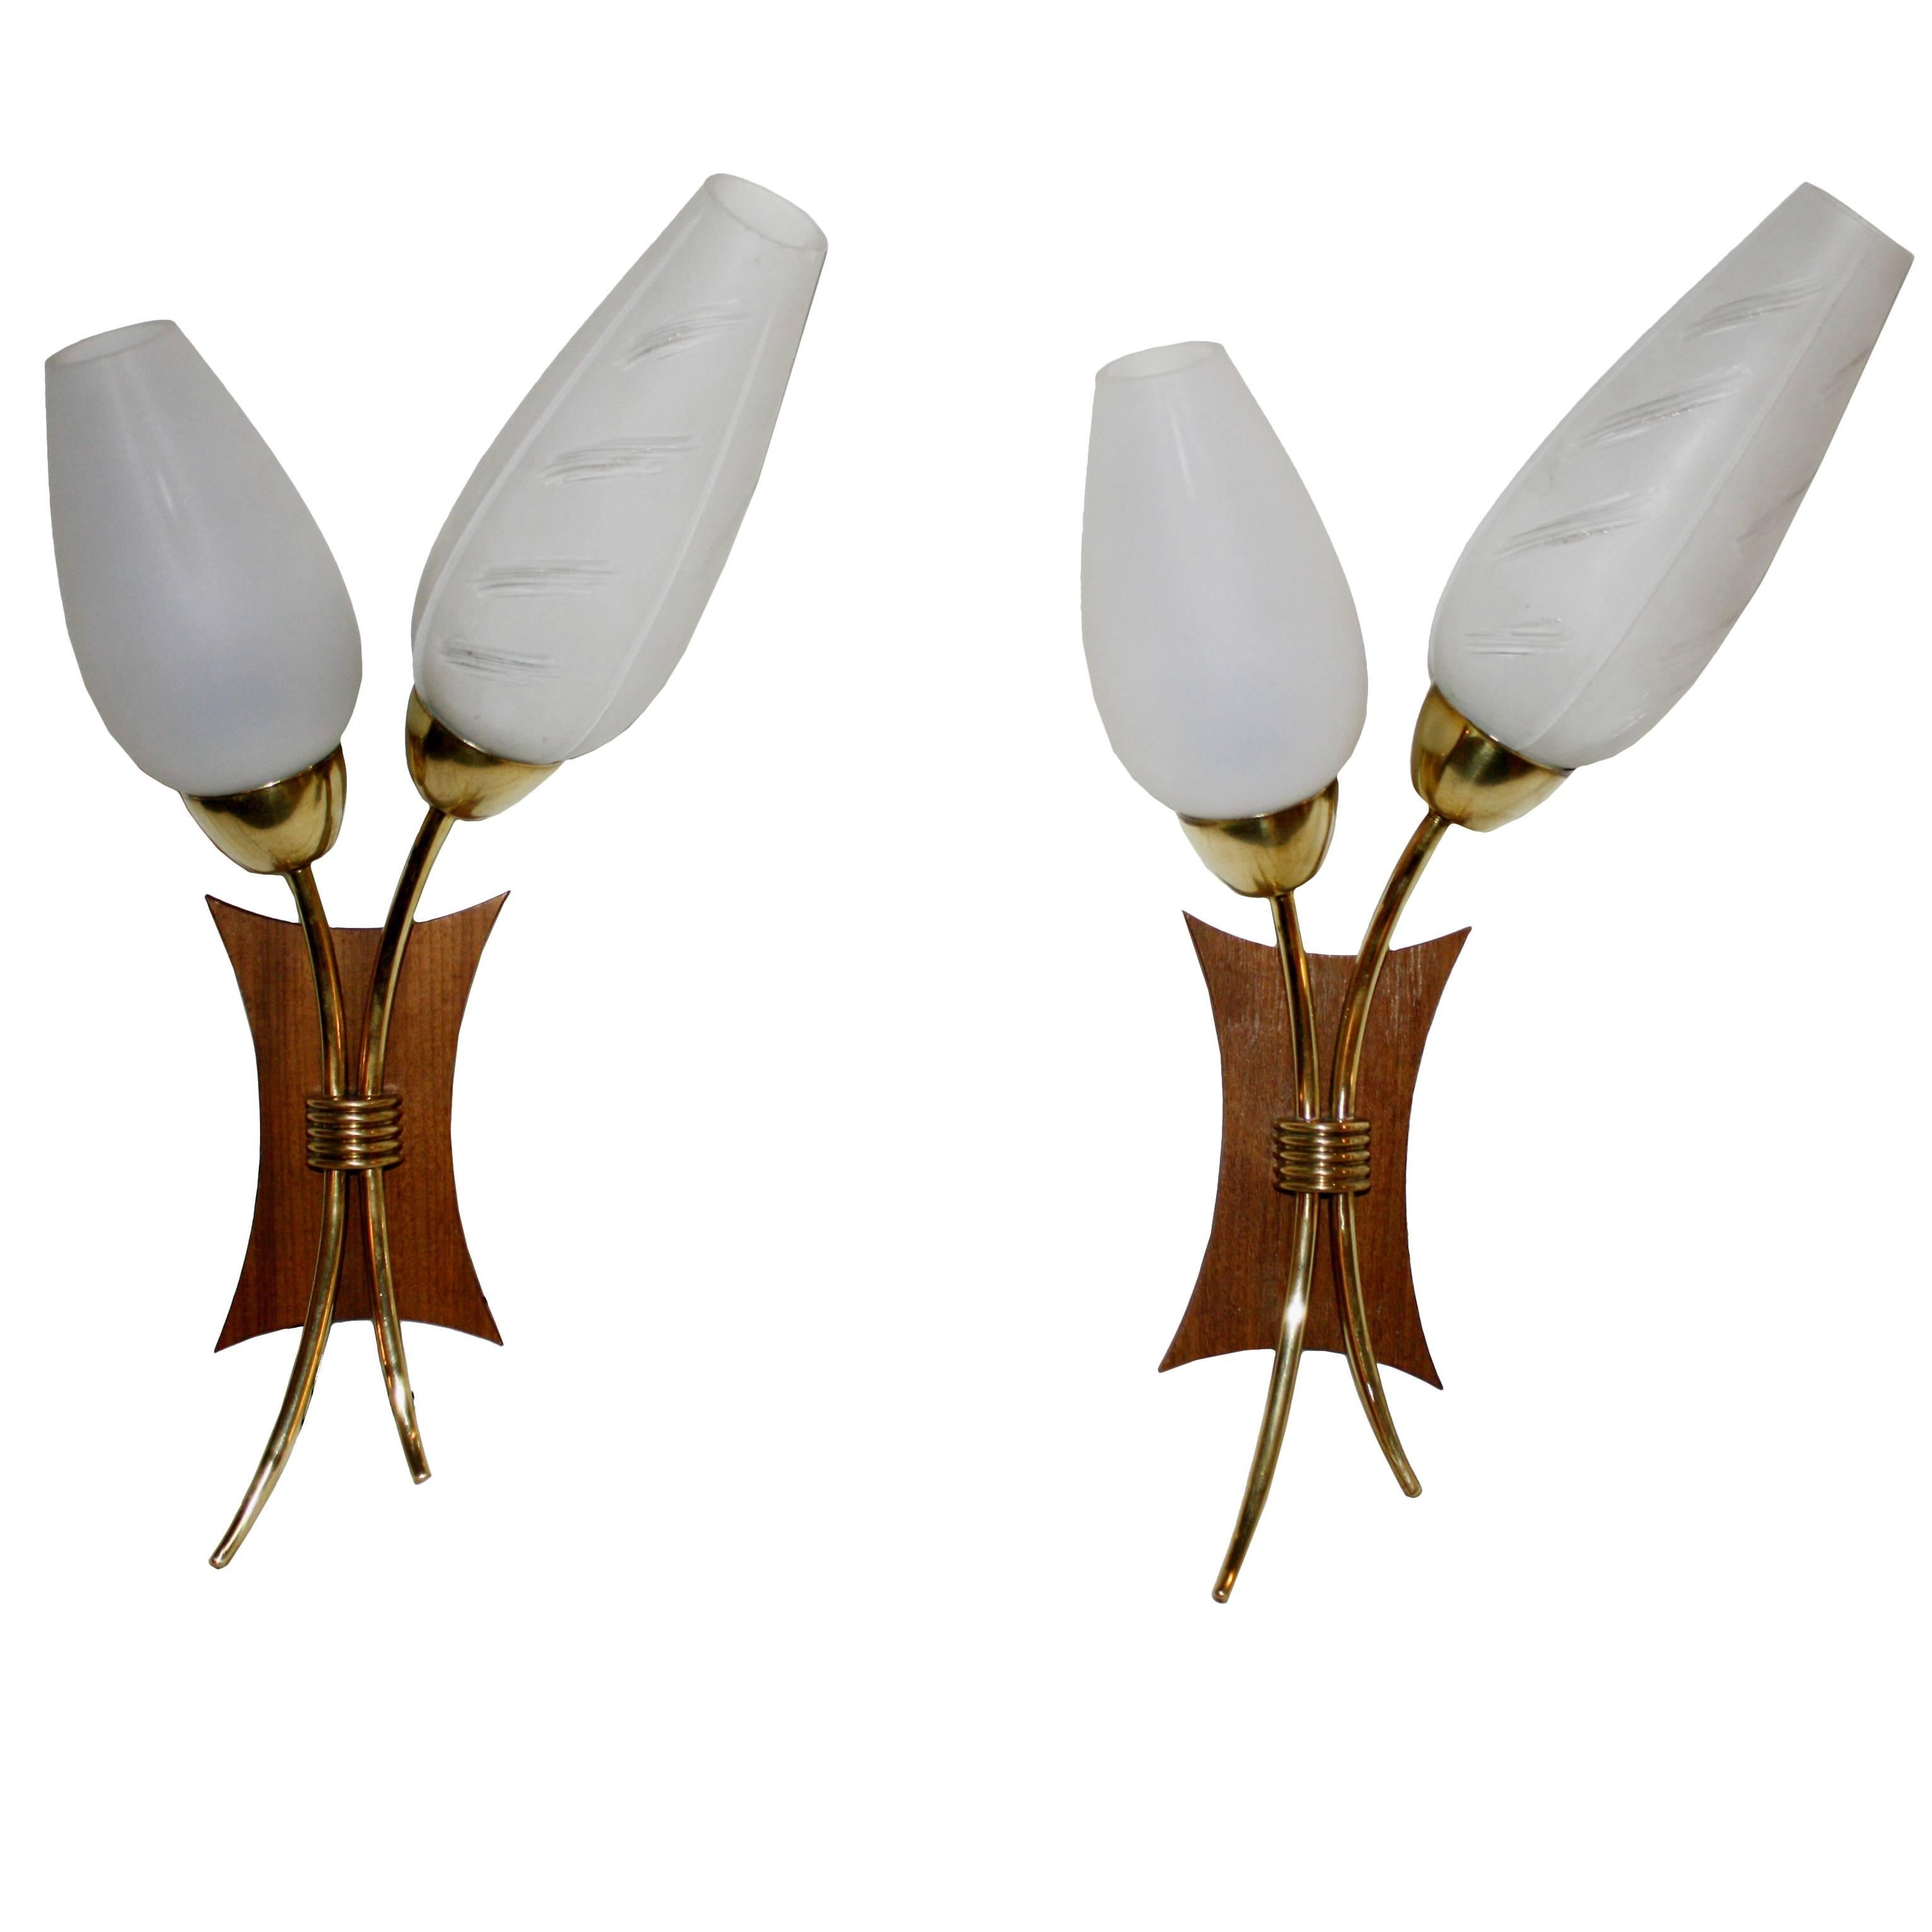 Pair of Brass Wall Sconces, 1950s